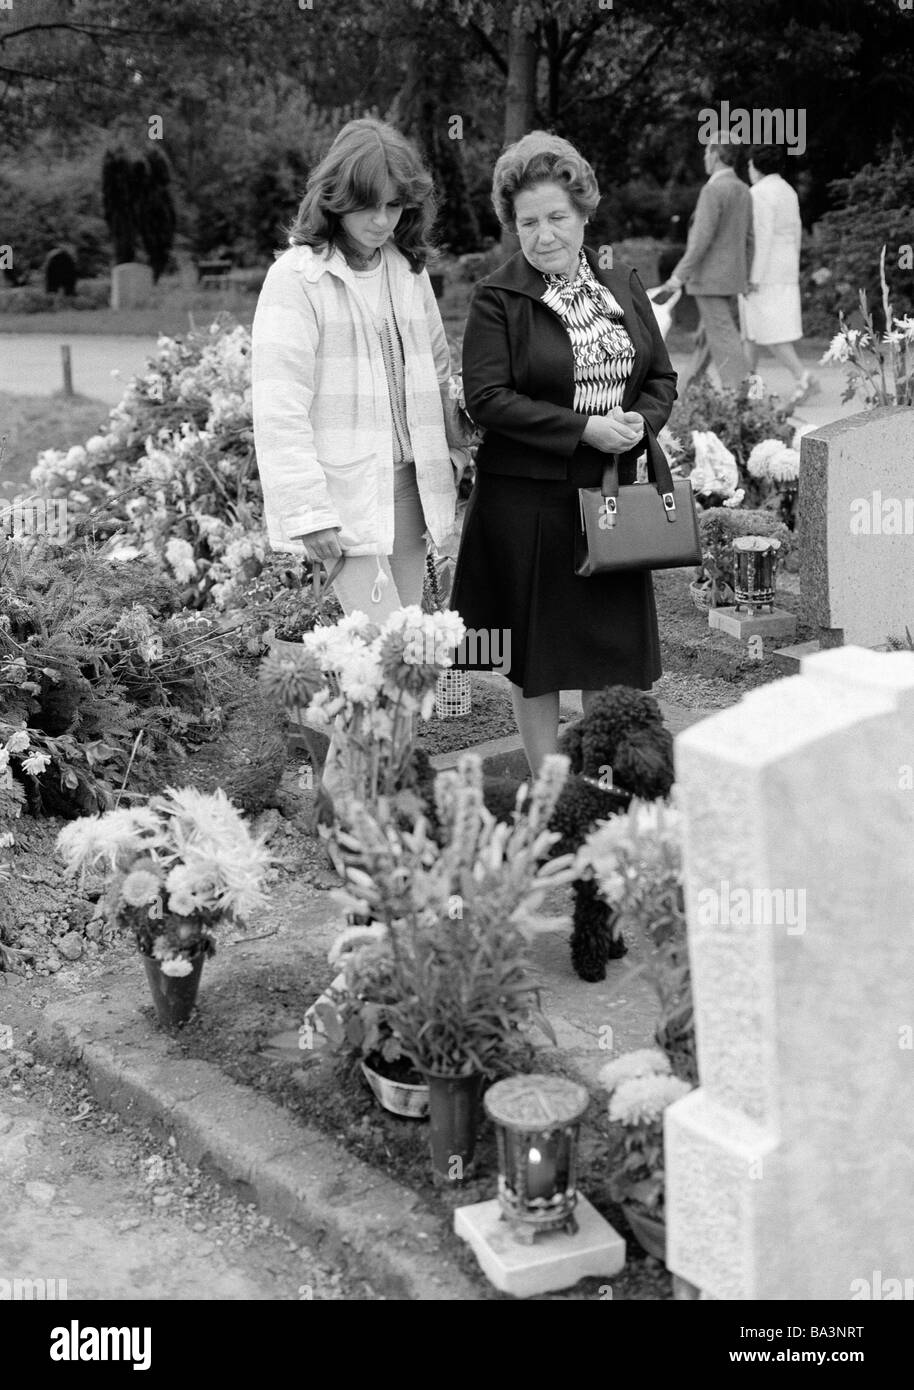 Seventies, black and white photo, people, death, mourning, churchyard, young girl and older woman stand at a tomb, flowers, aged 16 to 18 years, aged 60 to 70 years, Birgit, Frieda Stock Photo